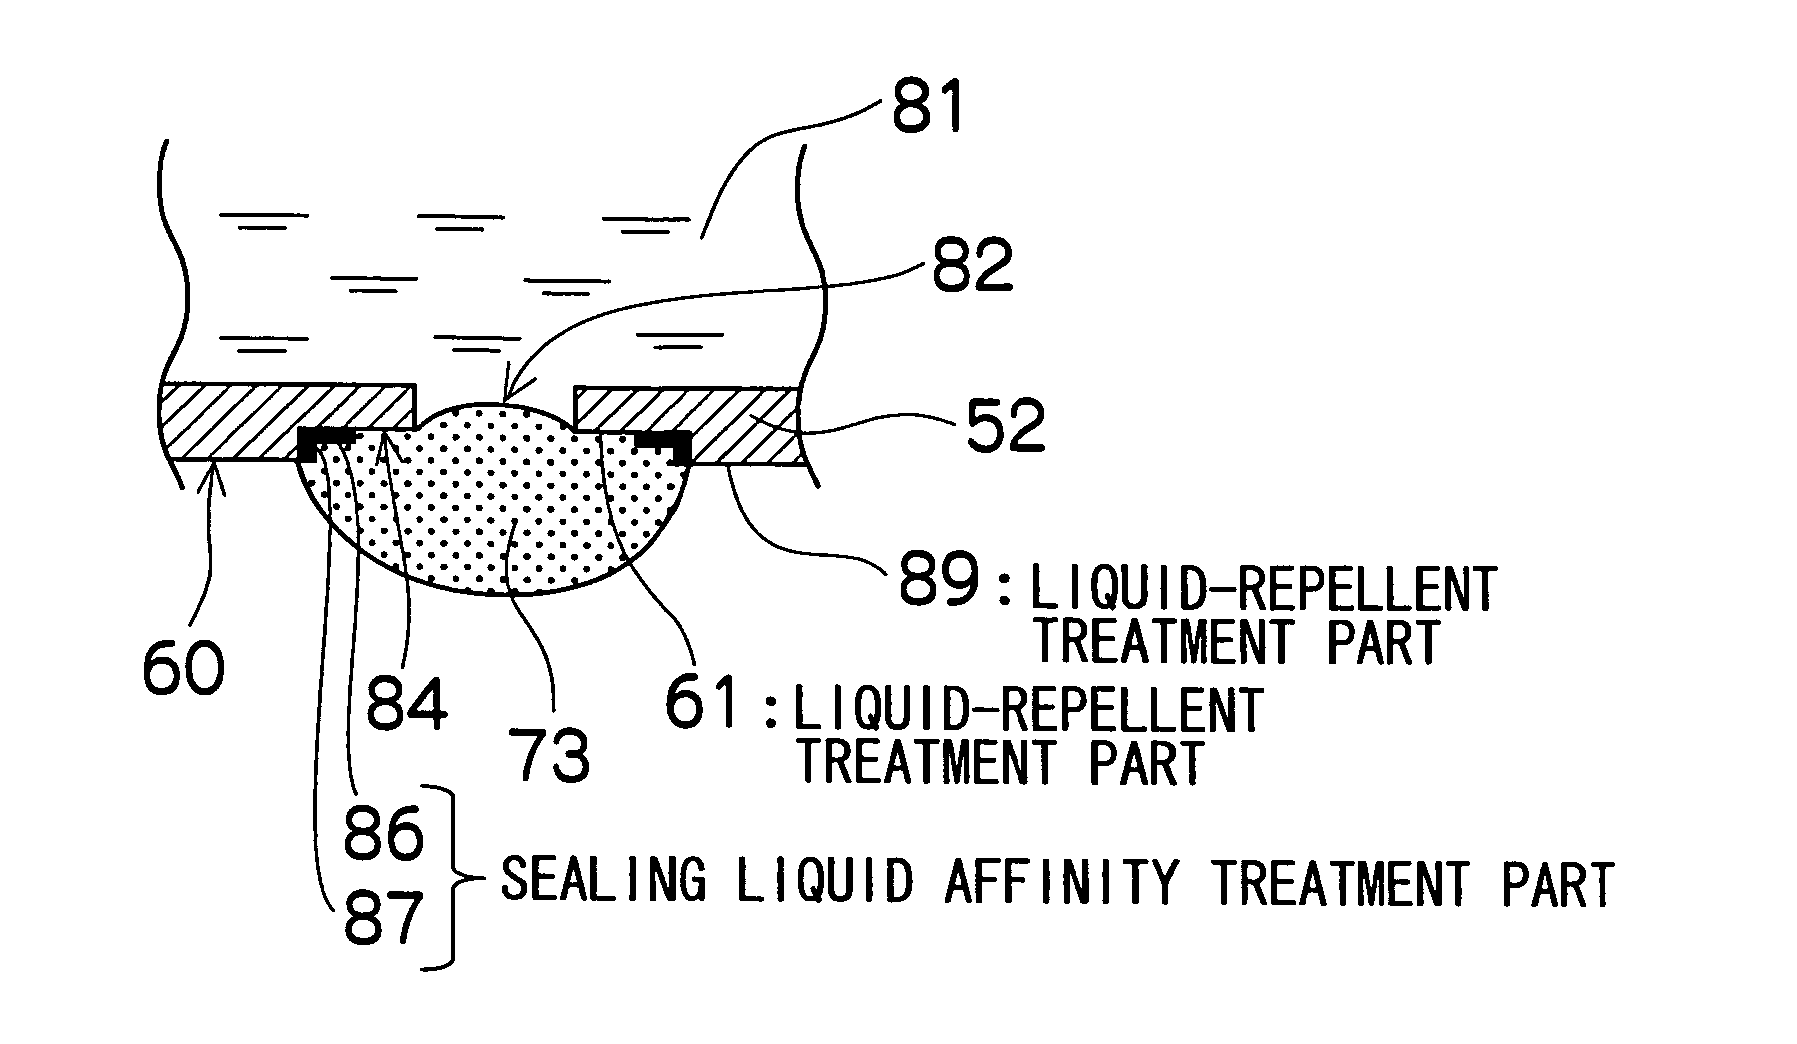 Inkjet recording head and image formation apparatus